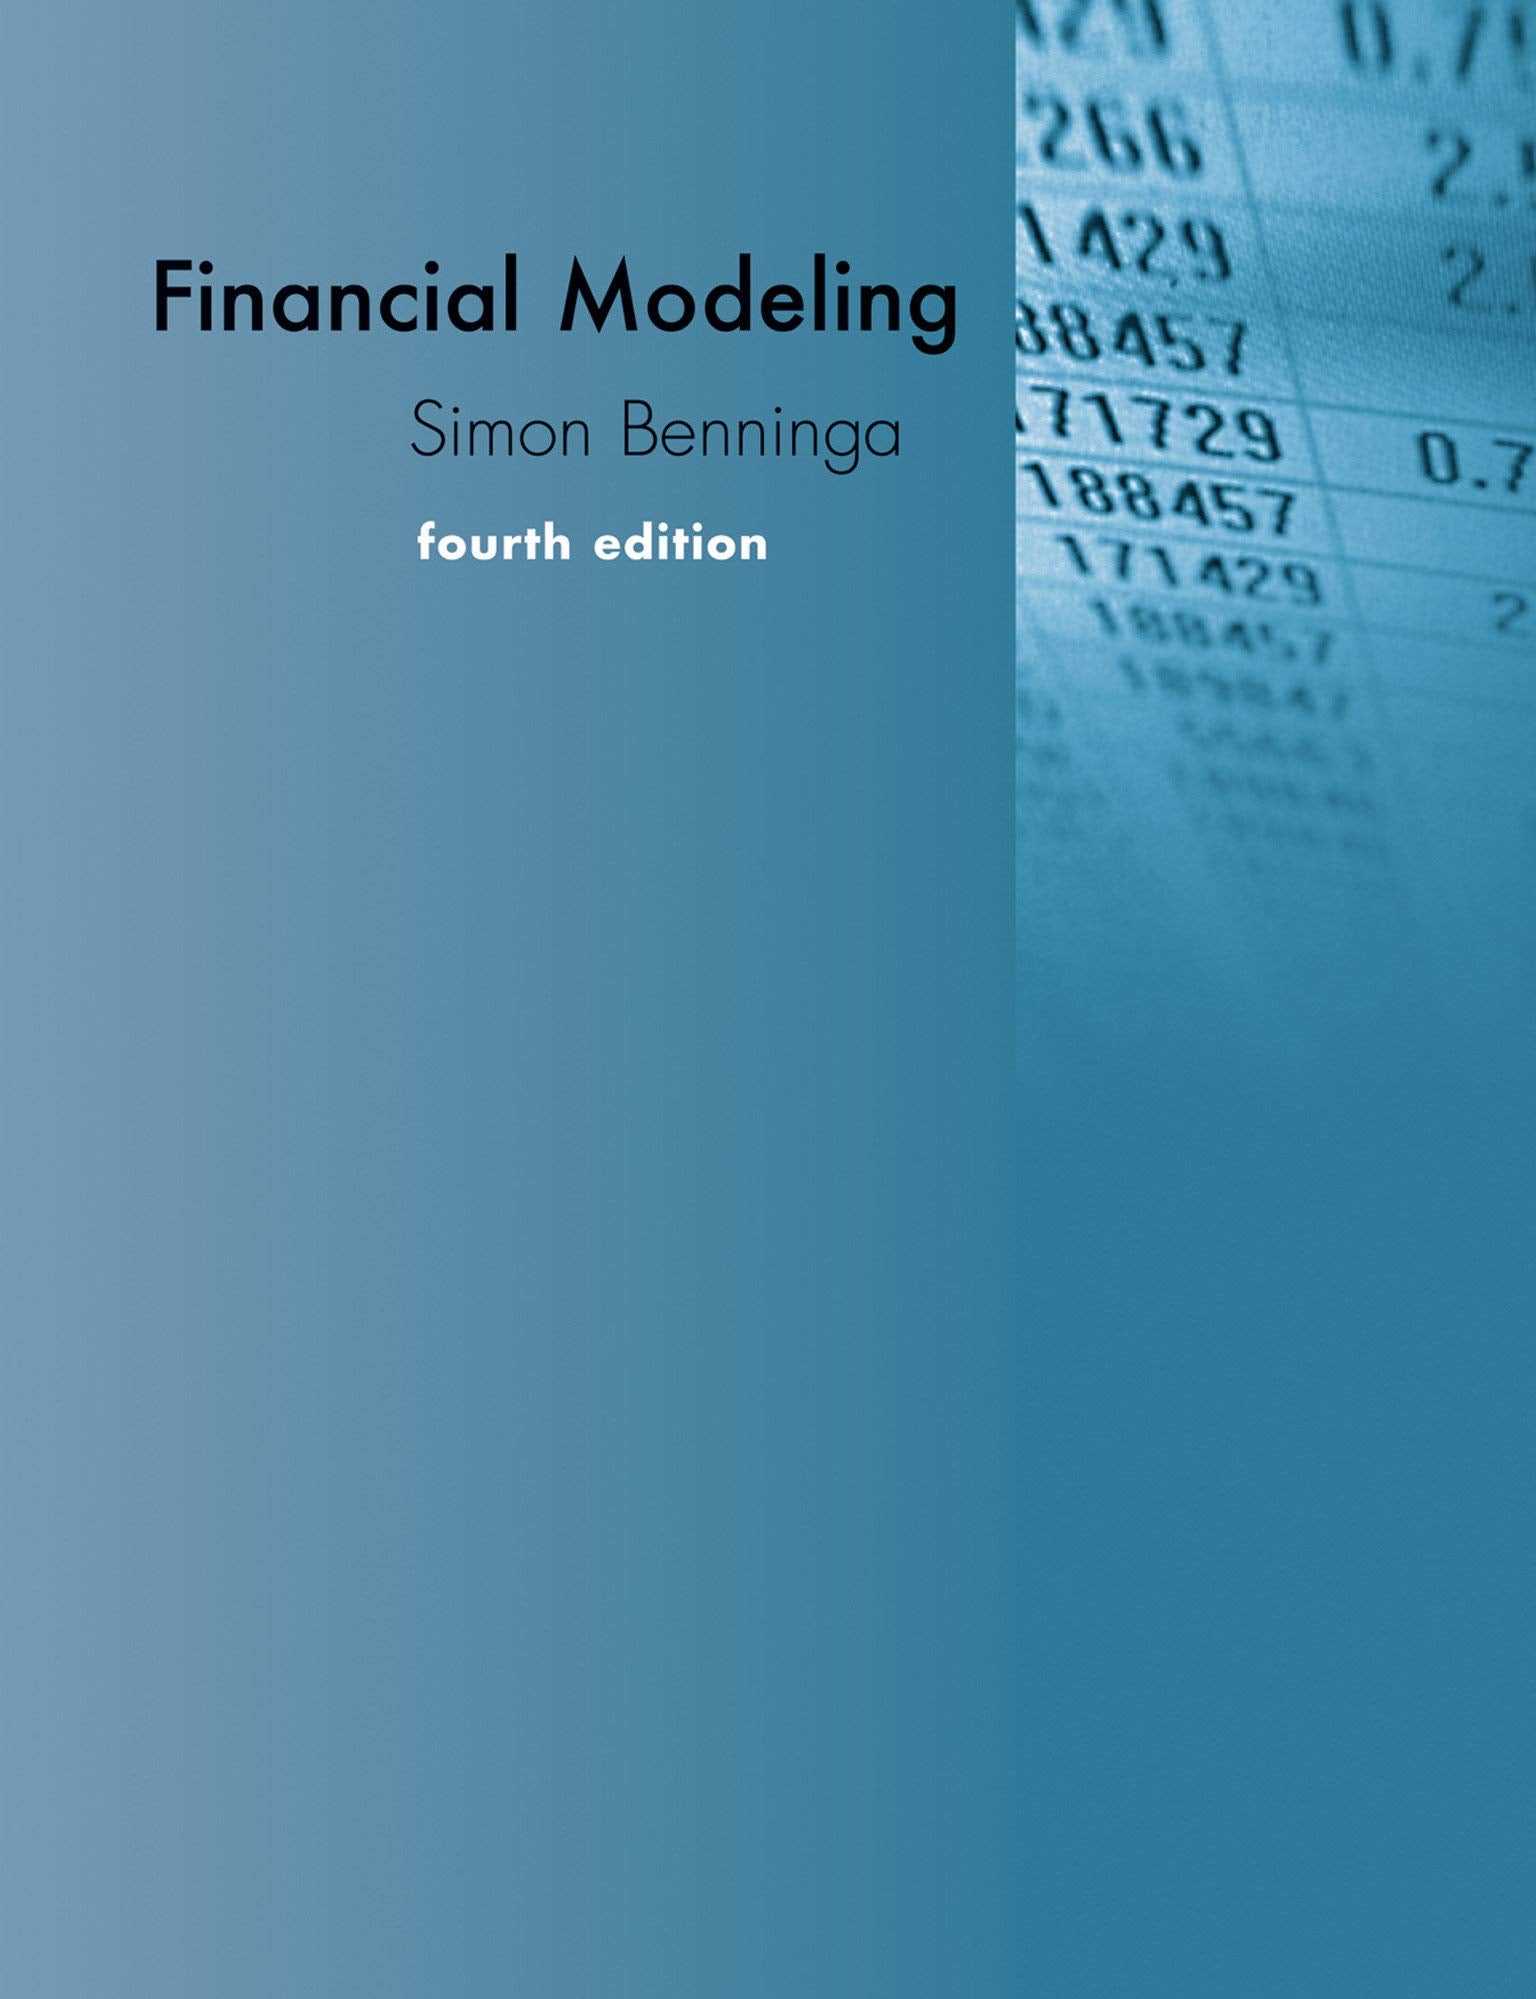 Financial Modeling  4th edition